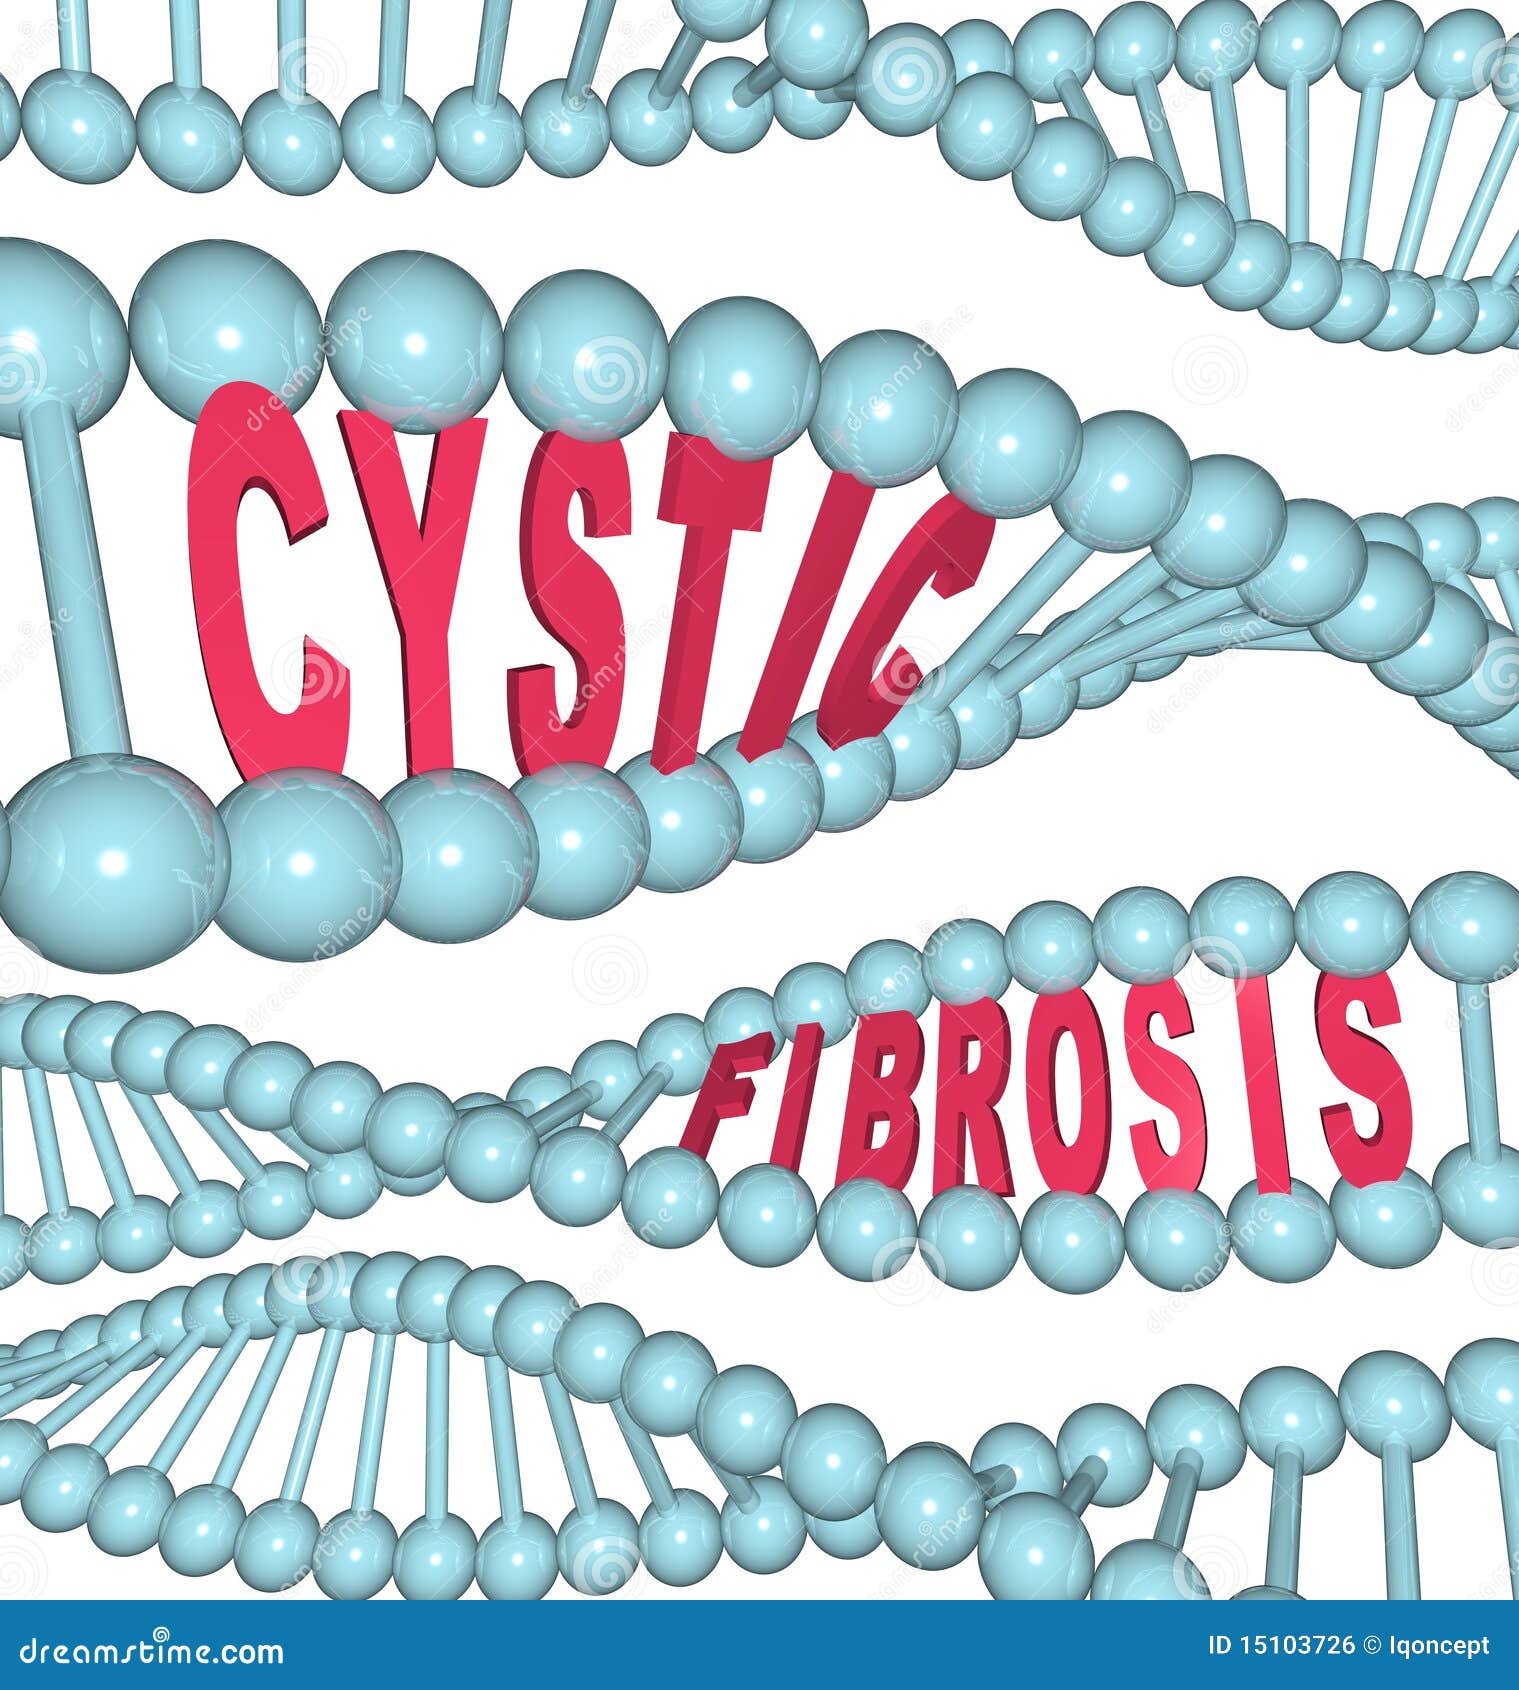 cystic fibrosis - words in dna